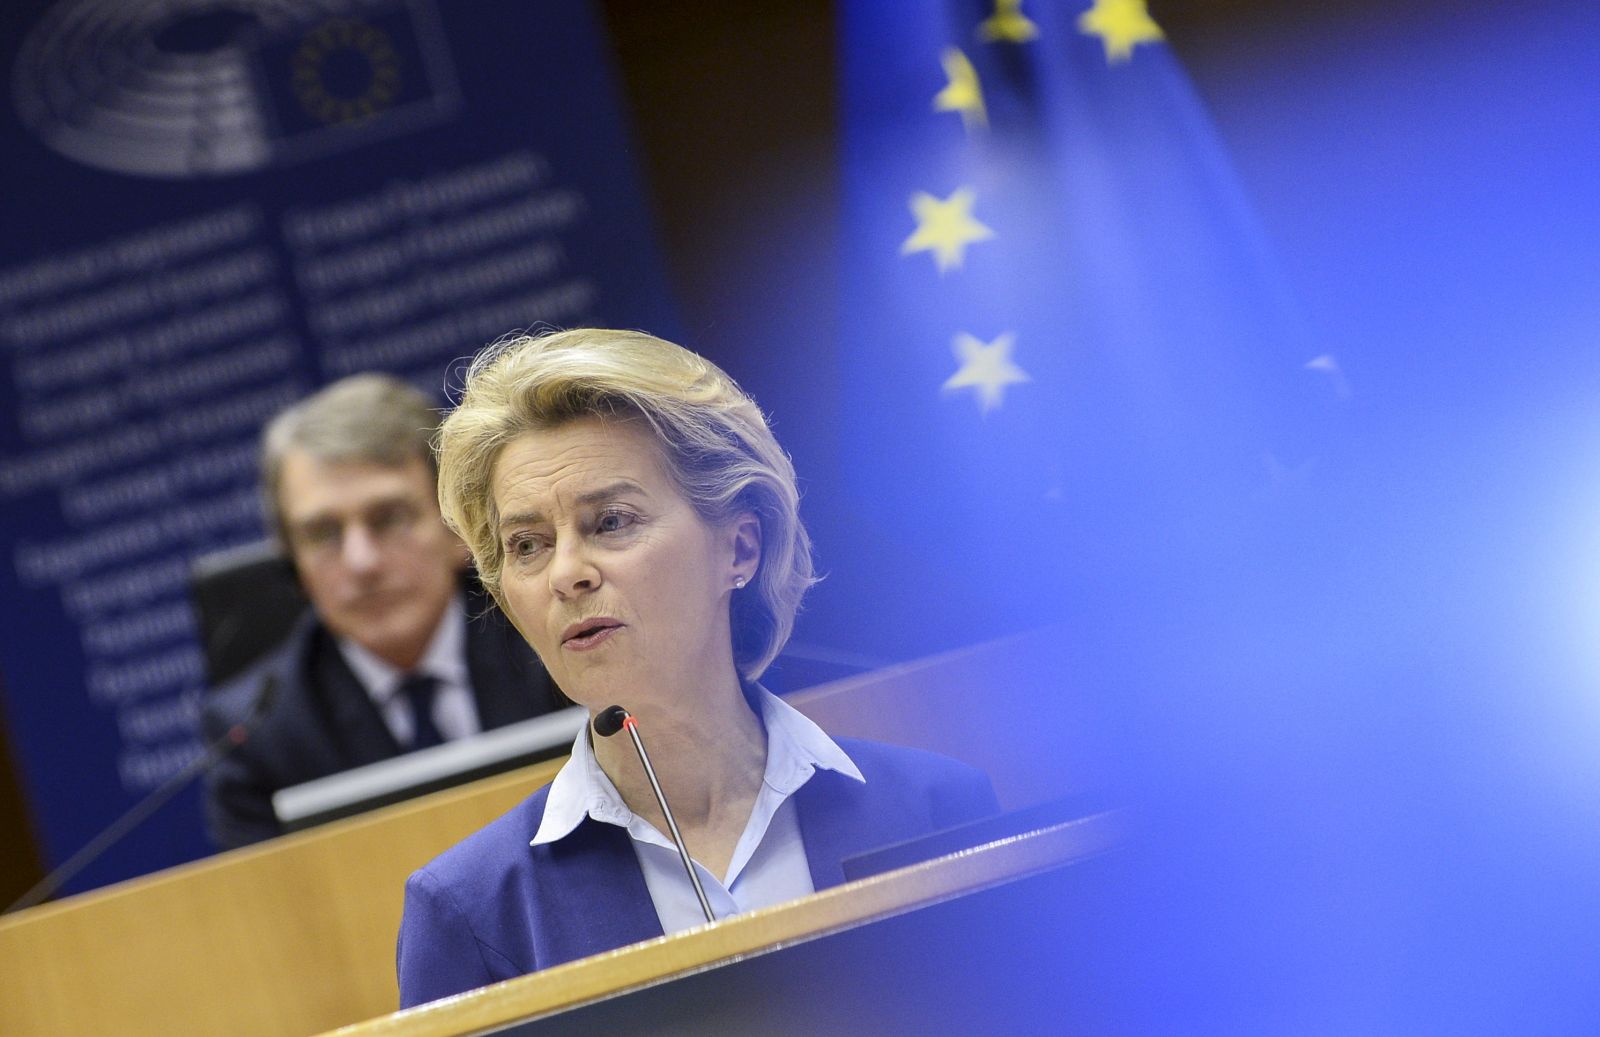 epa09065375 European Commission President Ursula von der Leyen (R) speaks at the signing ceremony of the declaration on the Future of Europe, in Brussels, Belgium, 10 March 2021.  EPA/JOHANNA GERON / POOL